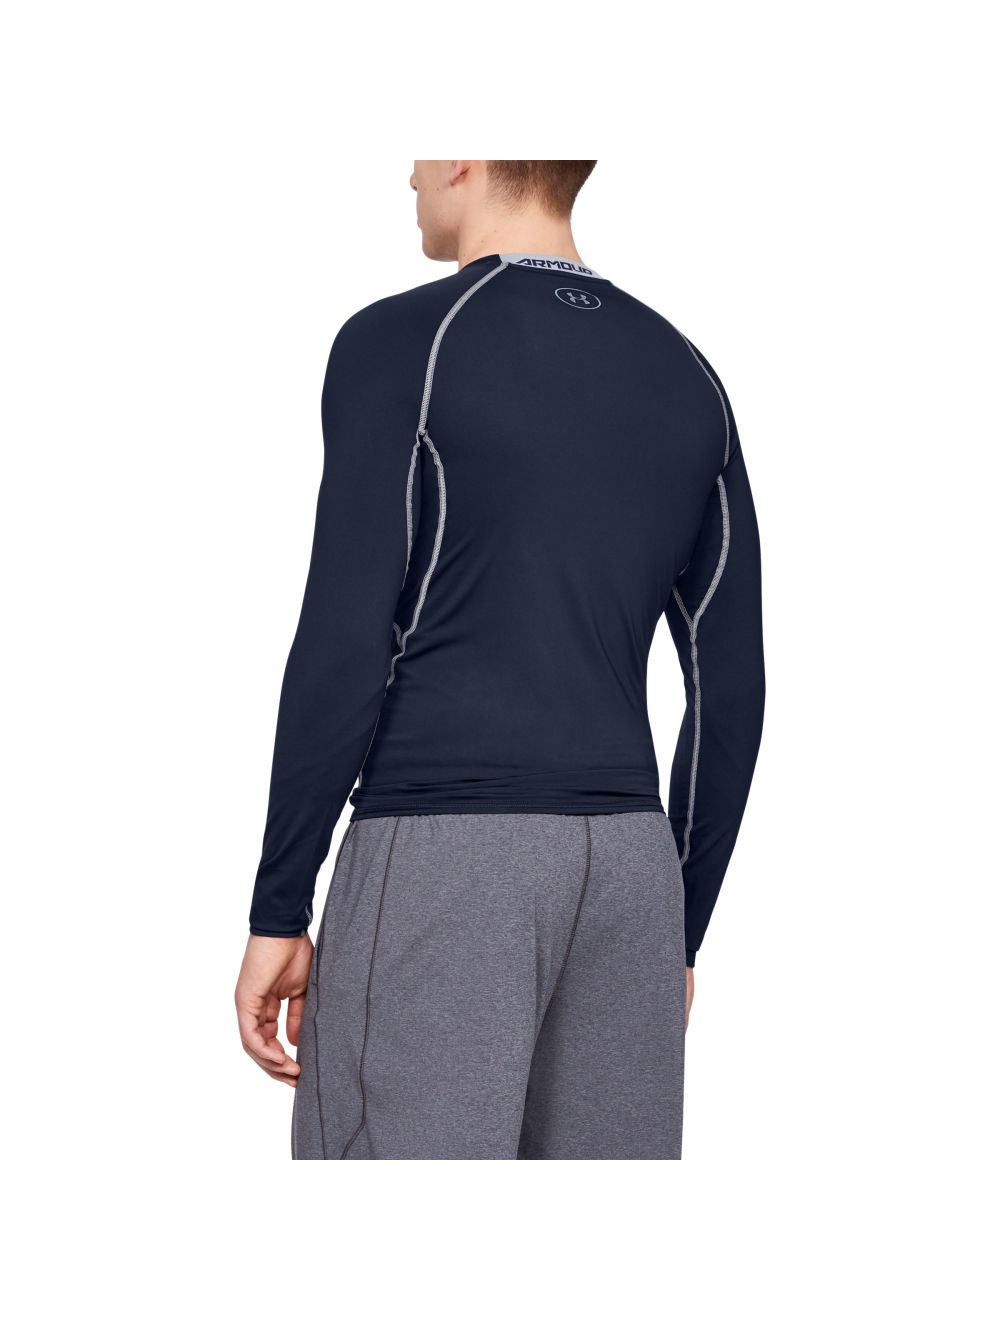 Under Armour HeatGear Armour compression t-shirt in navy